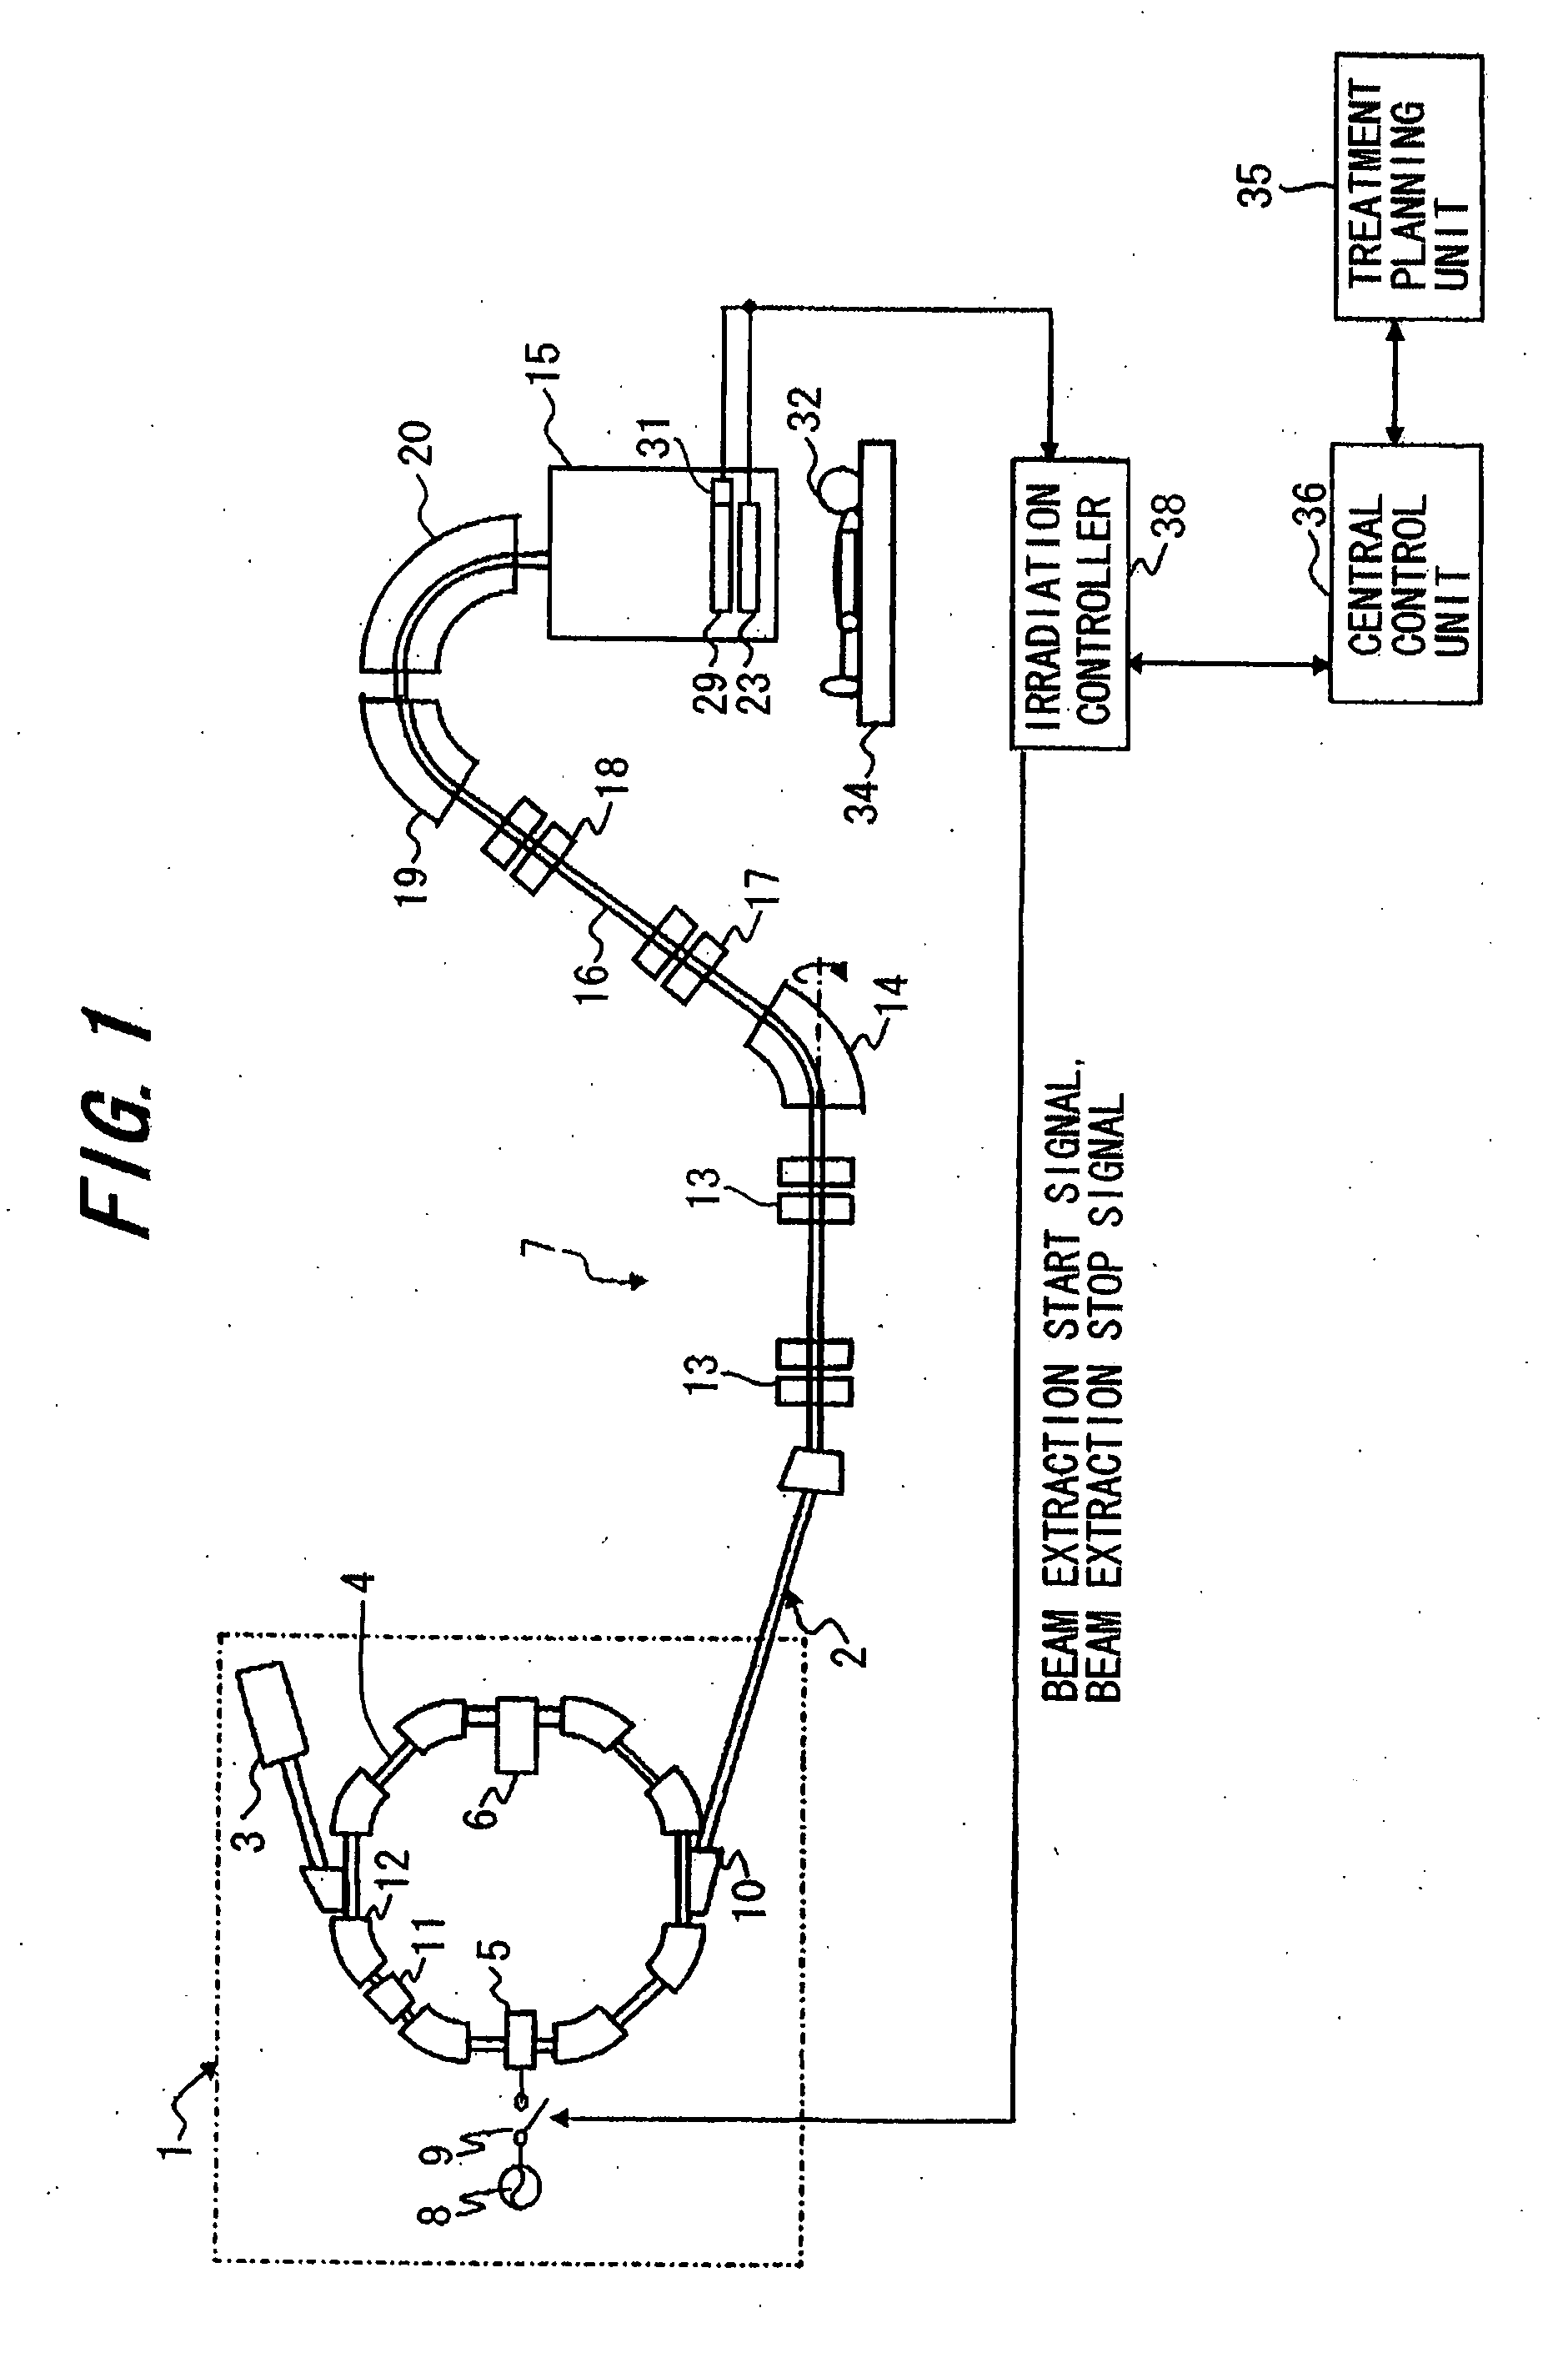 Ion beam delivery equipment and an ion beam delivery method